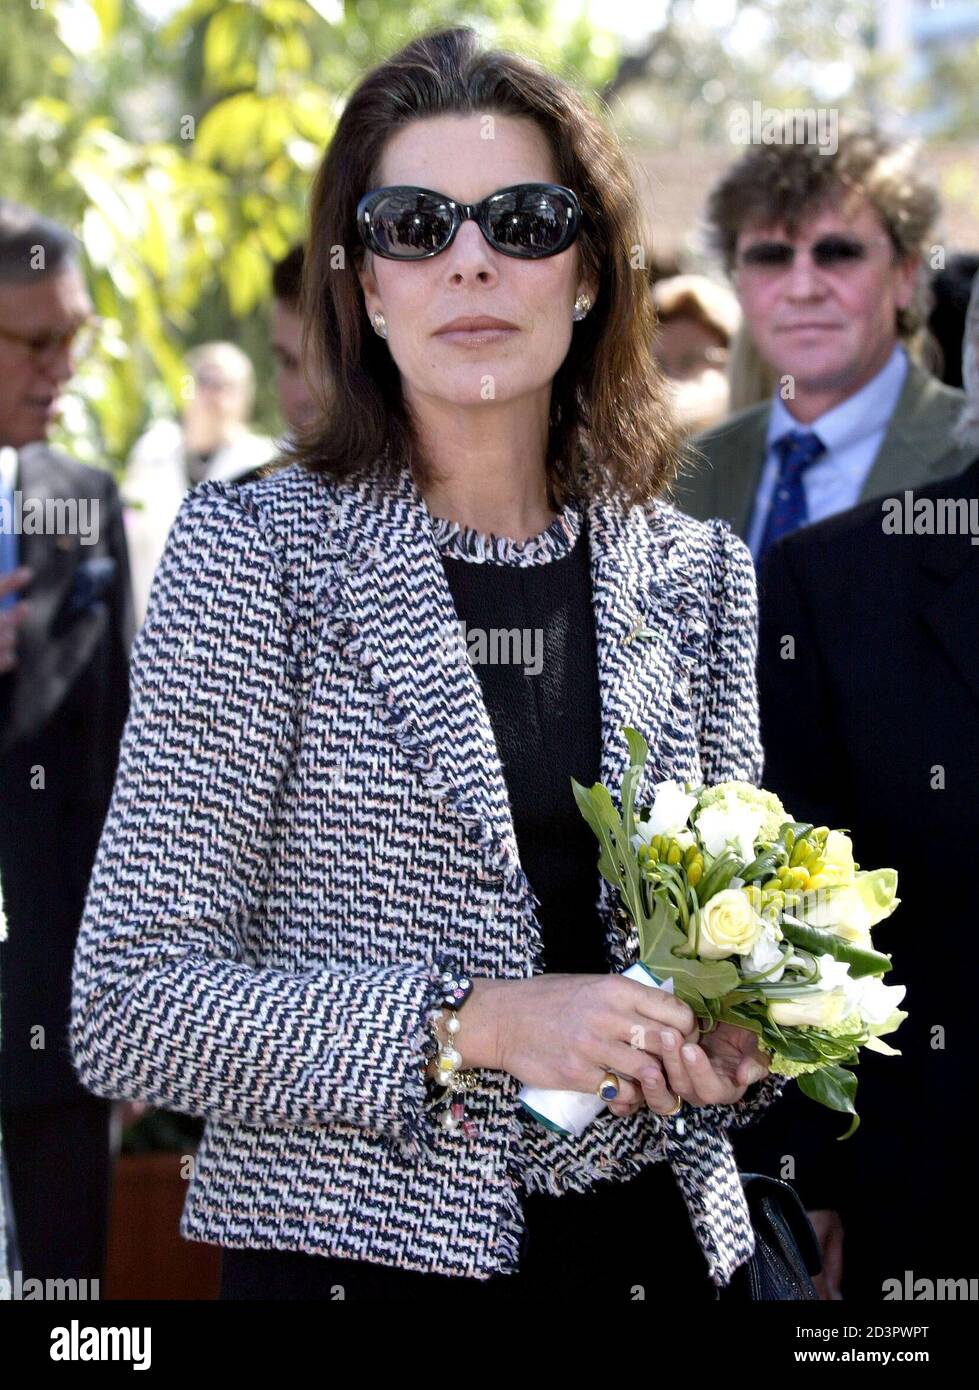 princess-caroline-of-monaco-and-her-husband-prince-ernst-august-of-hanover-r-attend-the-international-flower-show-in-monte-carlo-may-1-2004-reuters-eric-gaillard-eg-acm-2d3pwpt.jpg